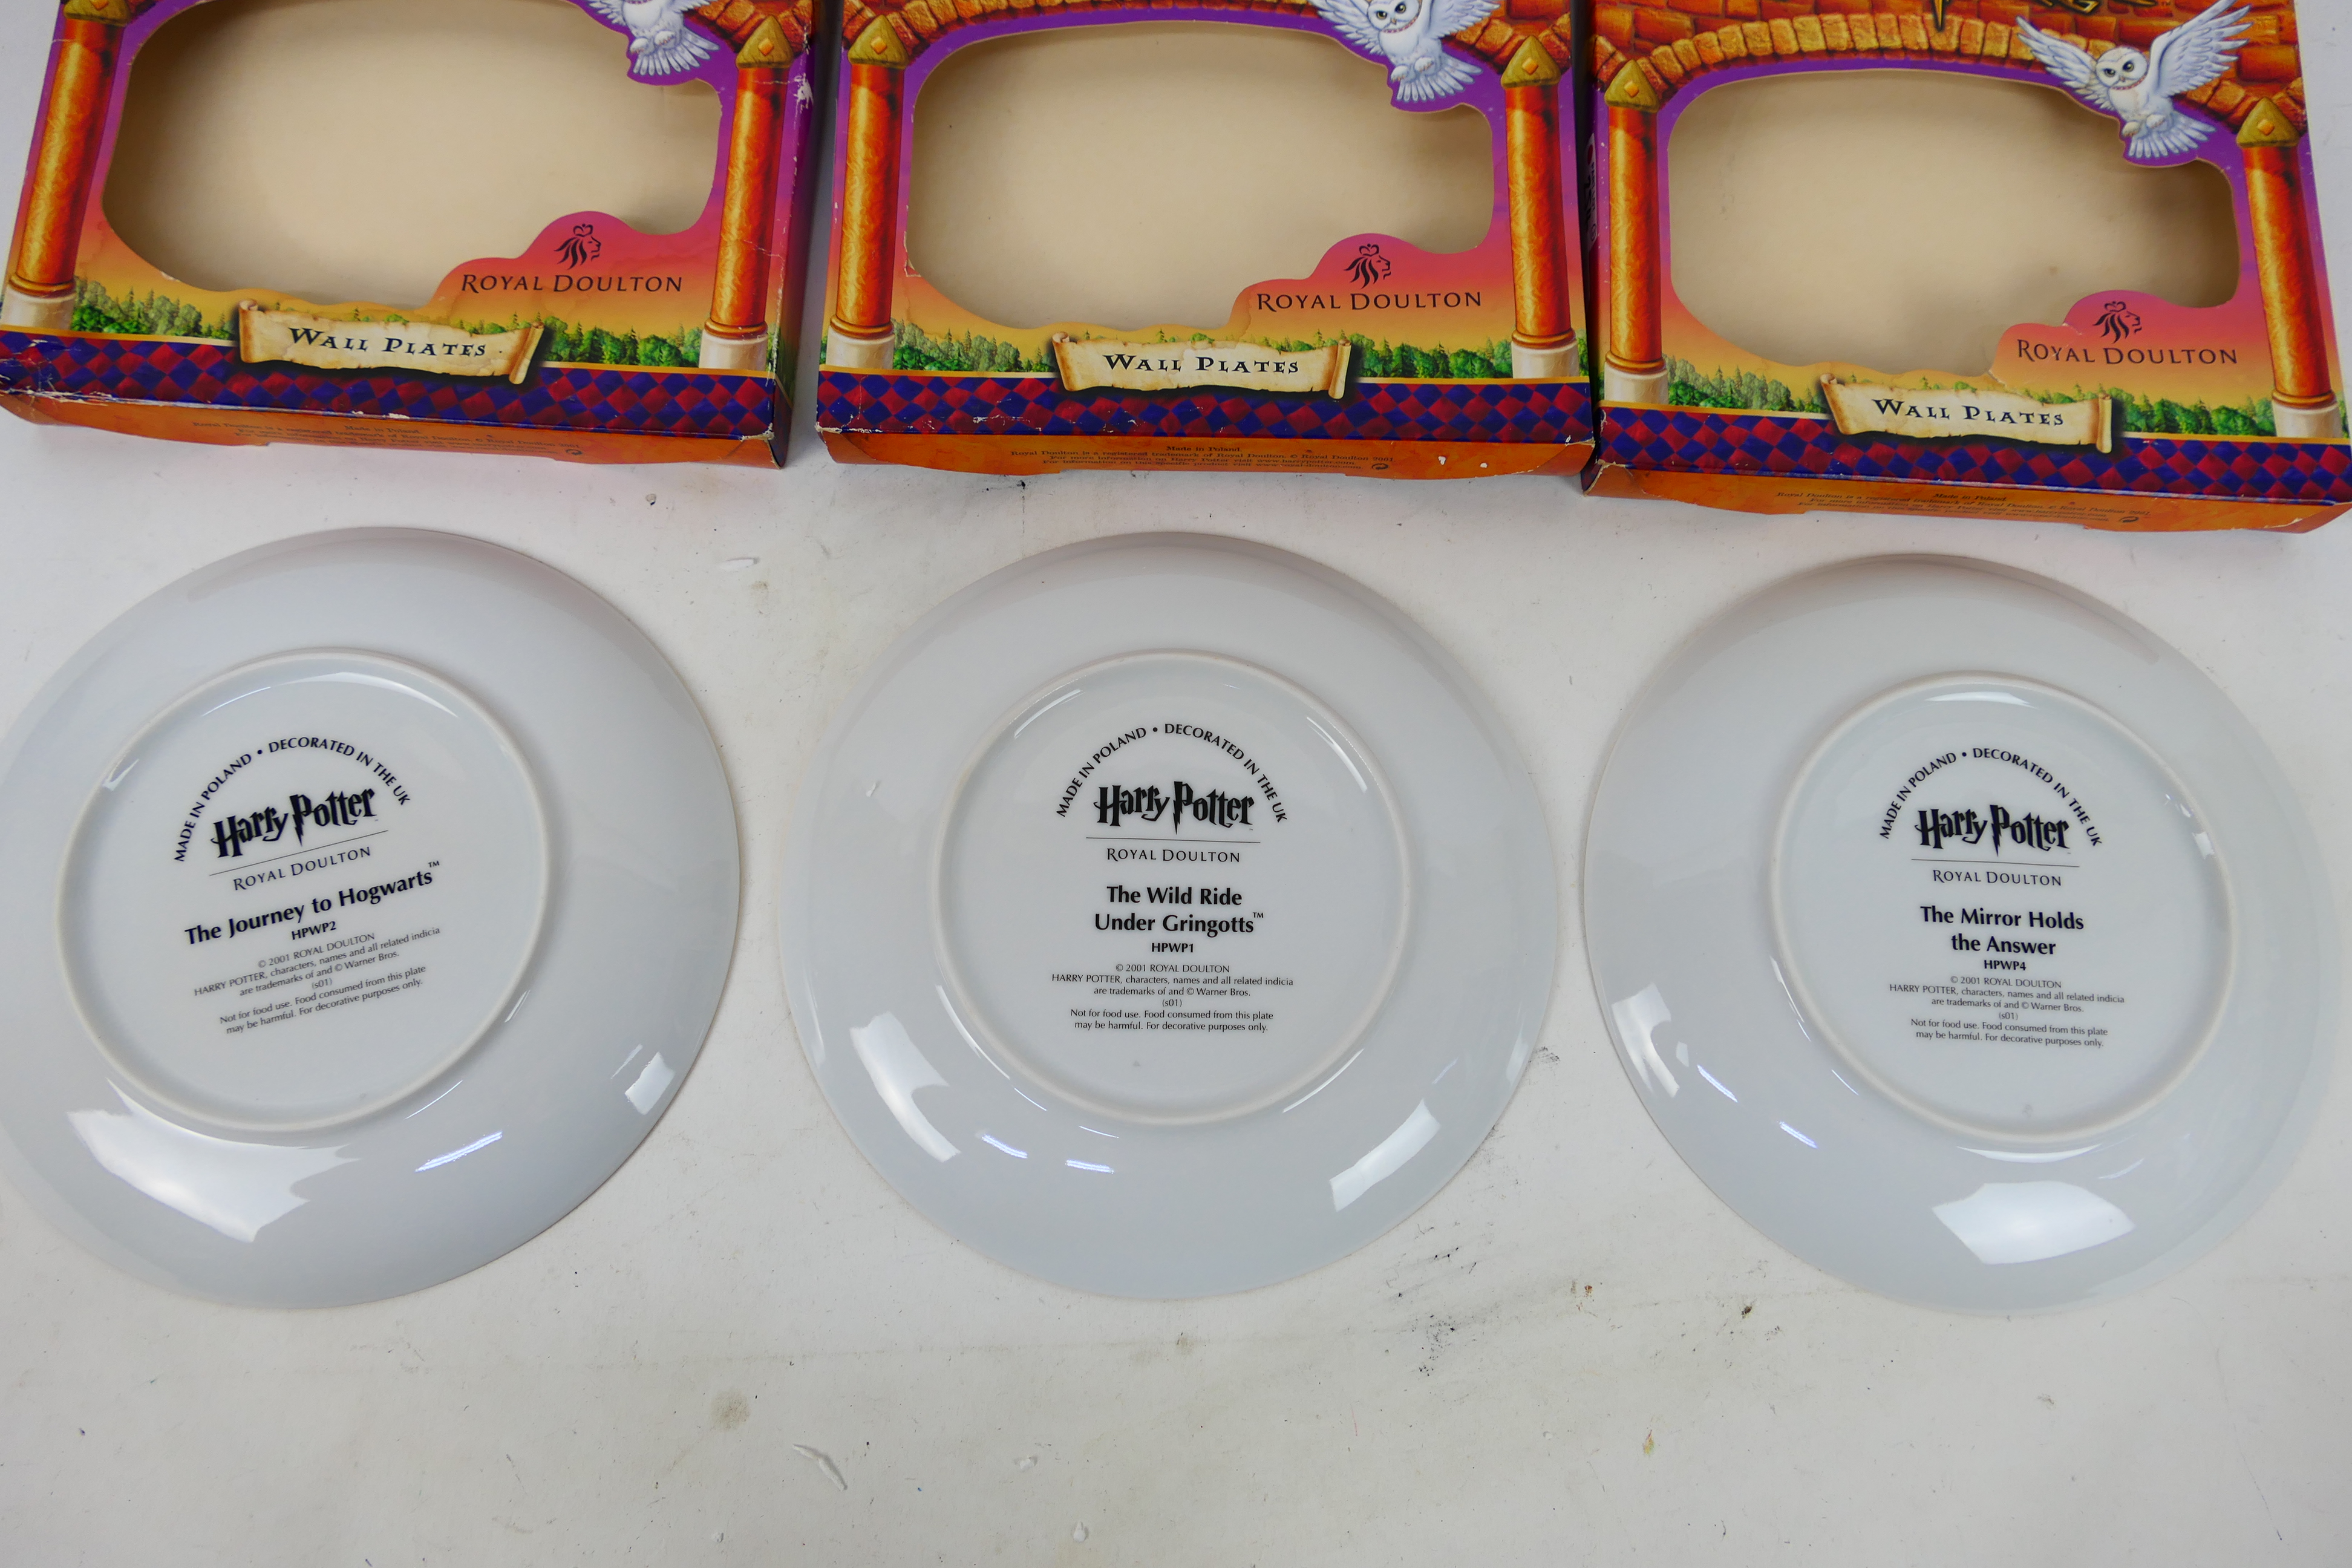 Royal Doulton - Three boxed Harry Potter wall plates, # HPWP4 The Mirror Holds The Answer, - Image 5 of 6